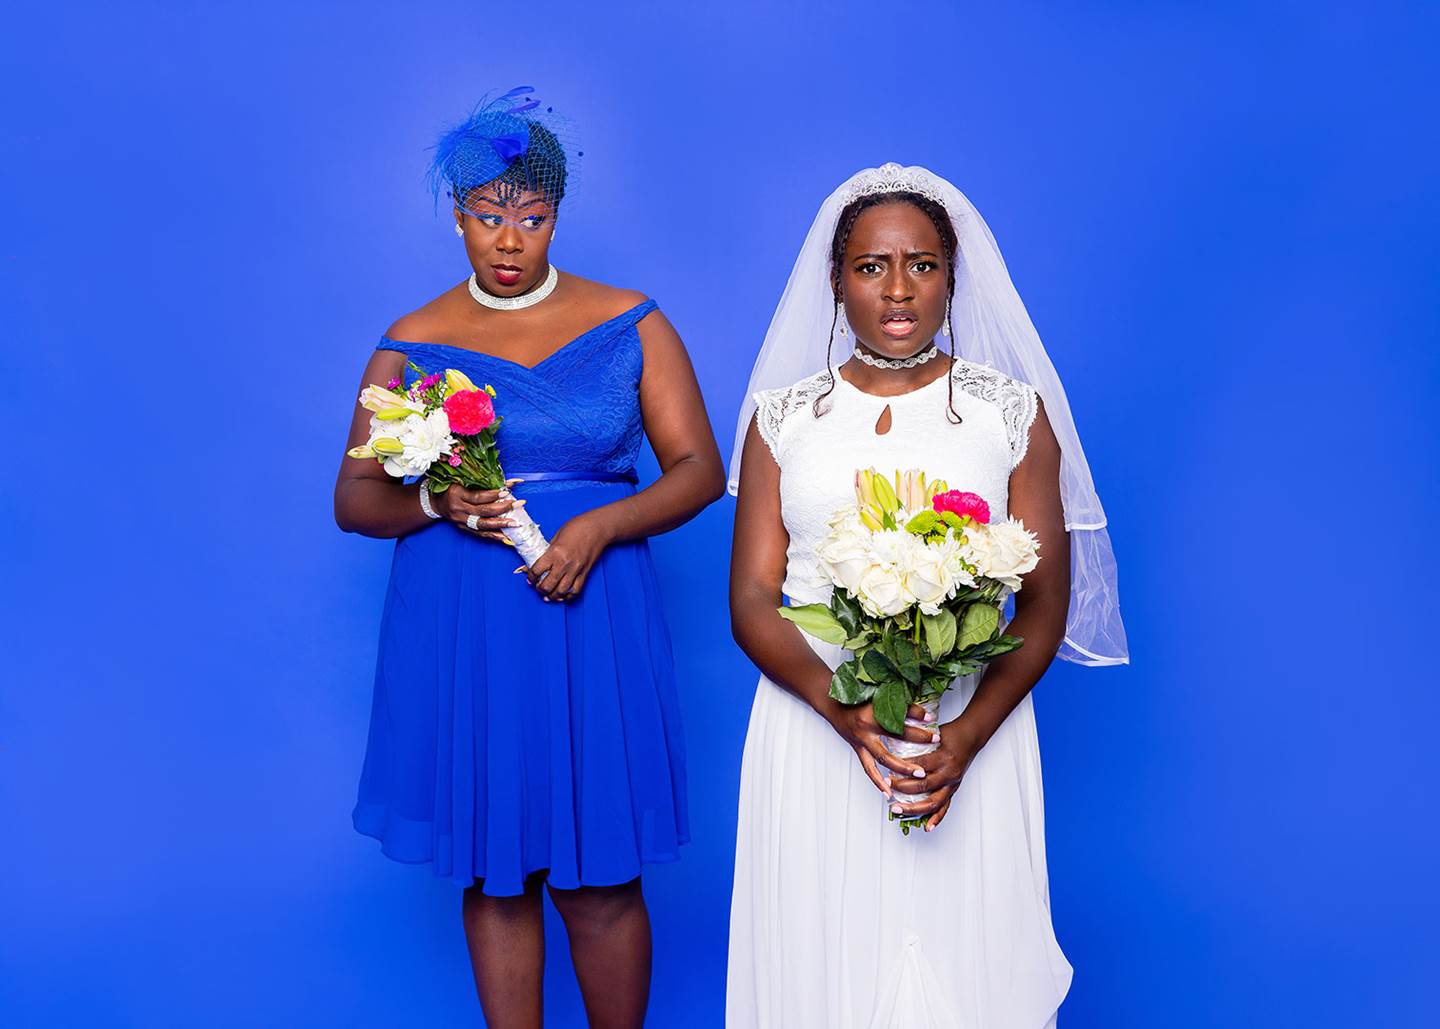 A bride and a bridesmaid wearing their dresses in front of a blue background.